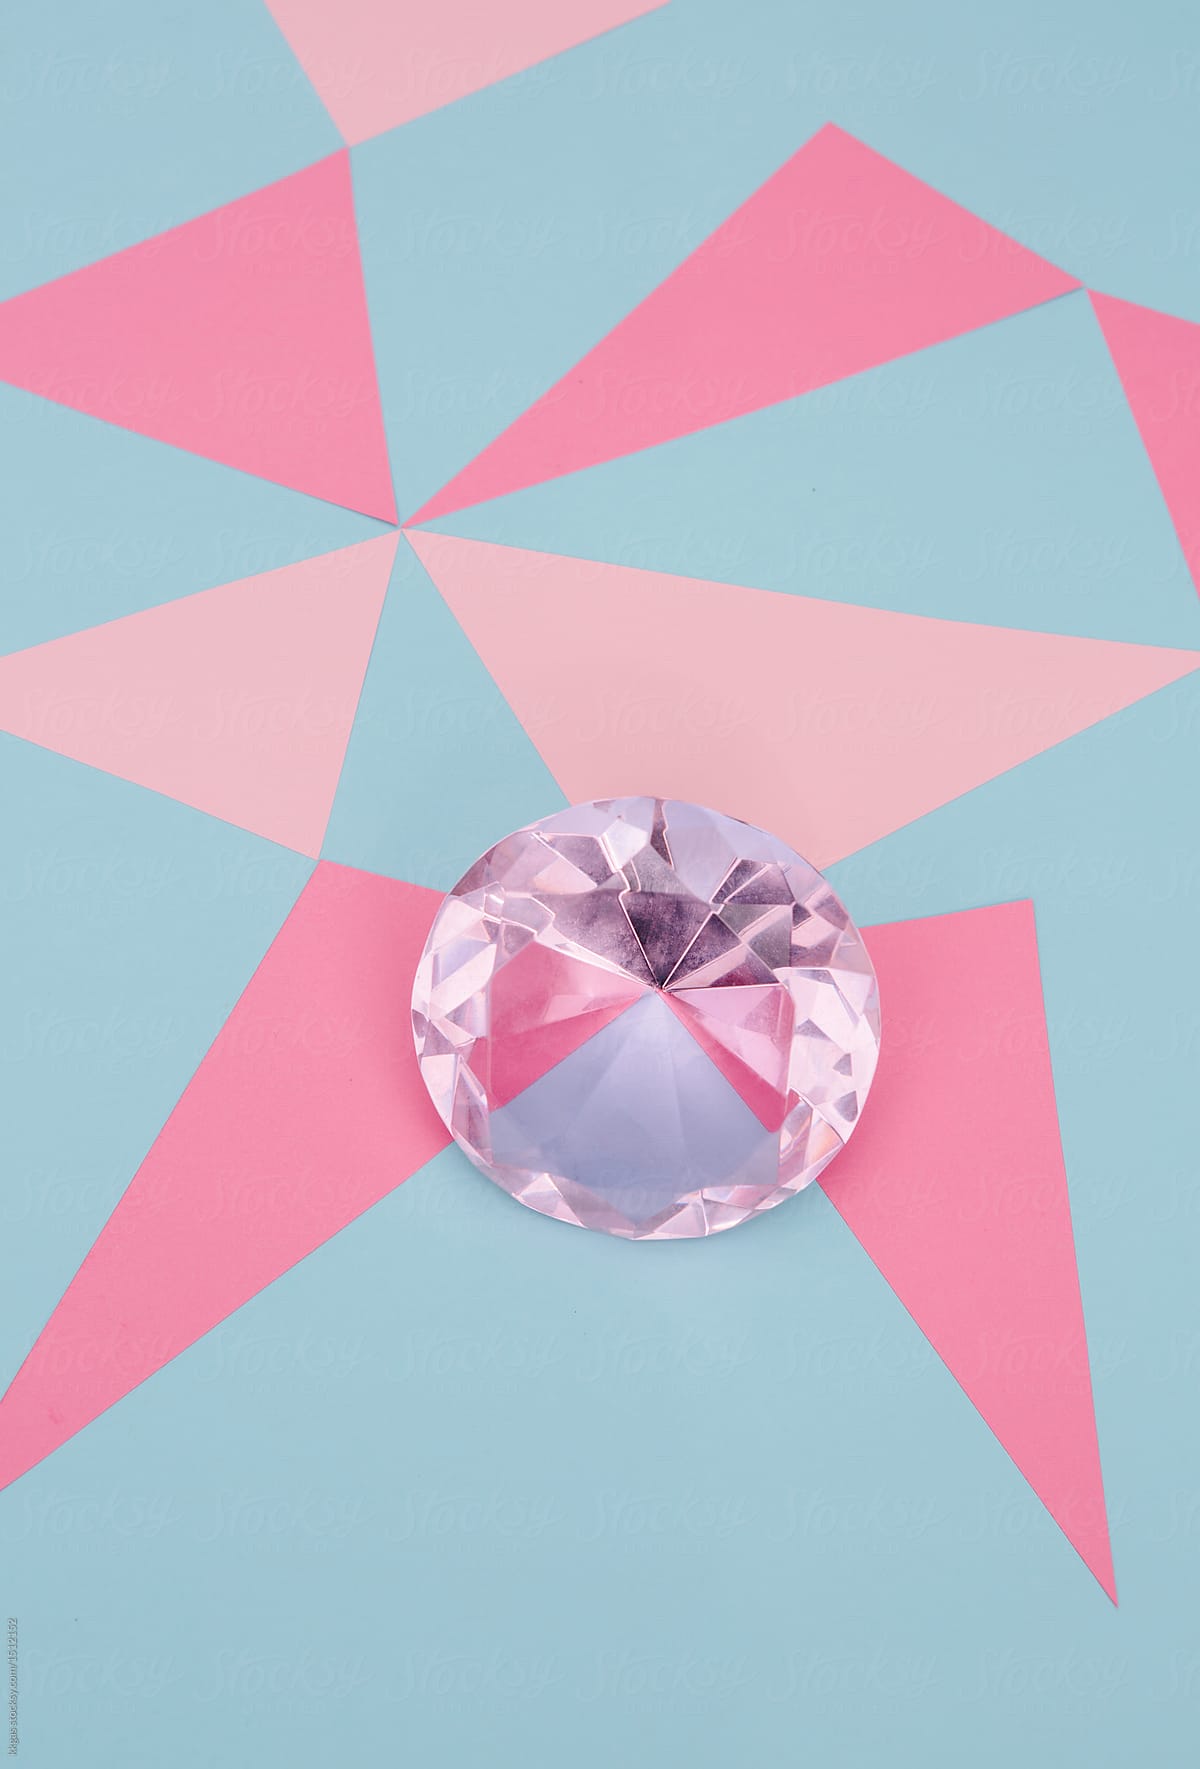 Large pink diamond on an abstract pink and blue background